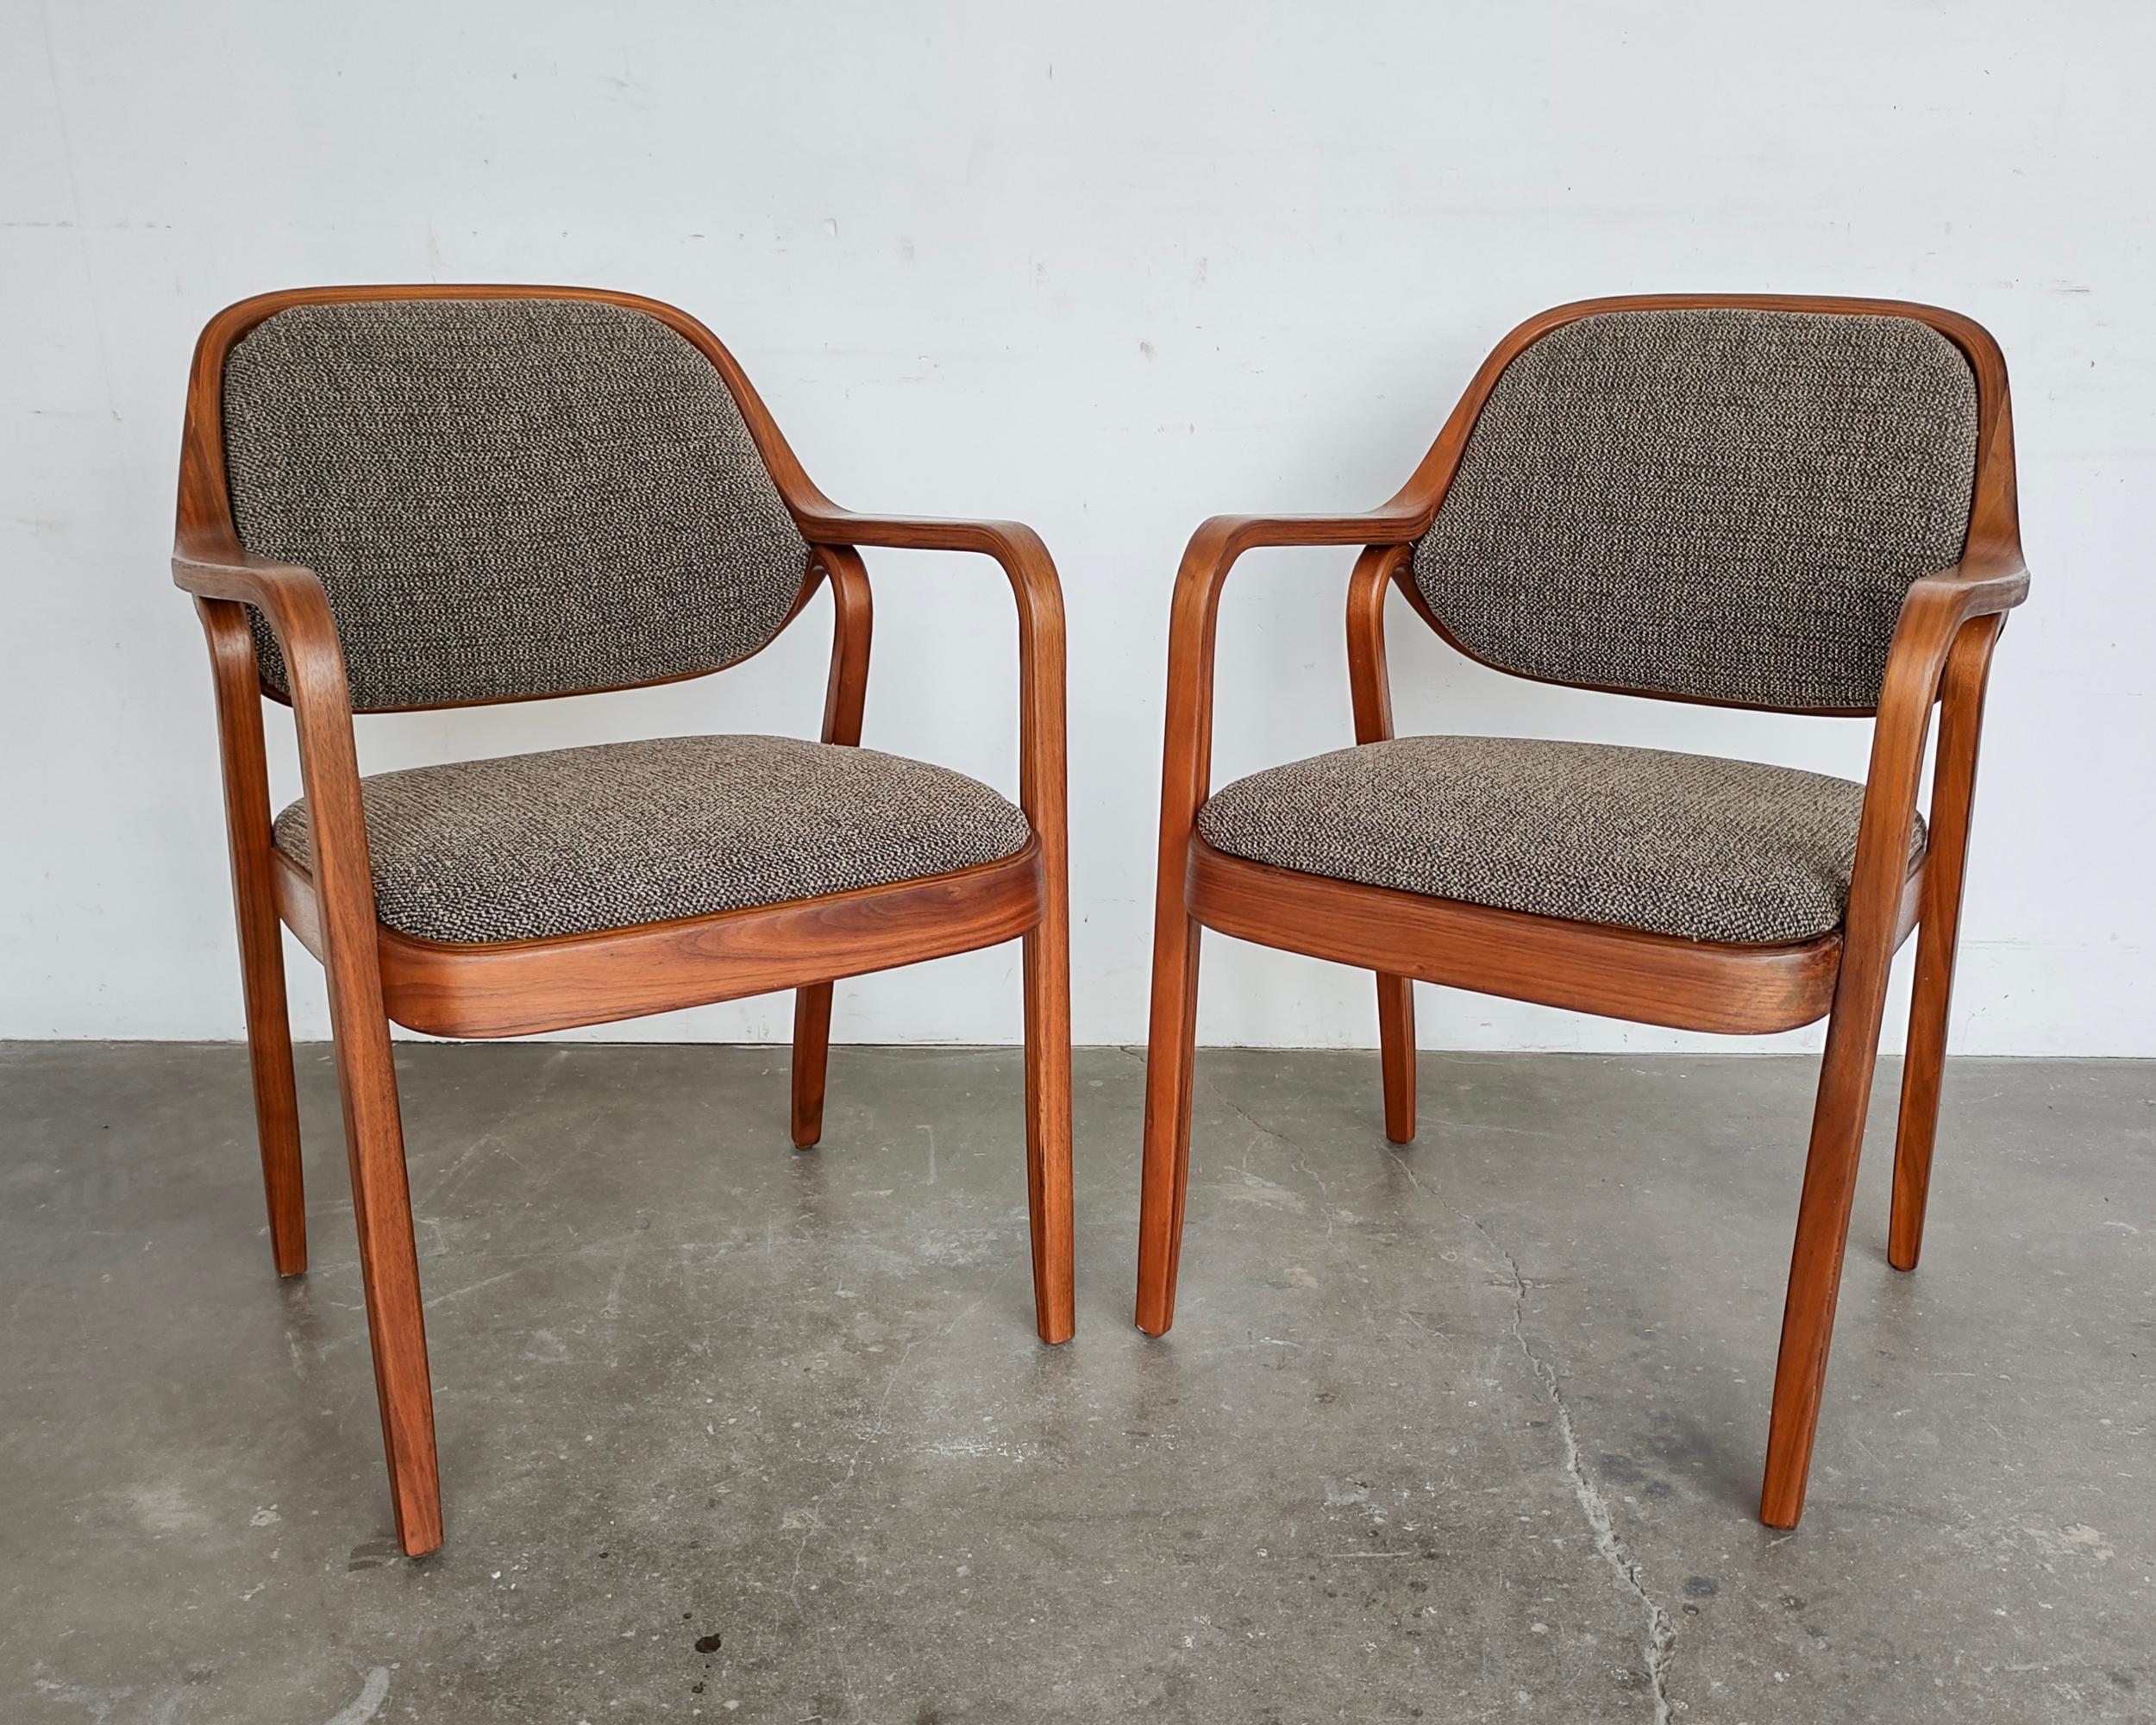 Set of two (2) '1105' bentwood walnut arm chairs by Don Pettit for Knoll designed in 1965. Neutral tone tweed upholstery highlights the walnut beautifully. Frame is made up of three separate pieces of bent walnut plywood, there are some minor